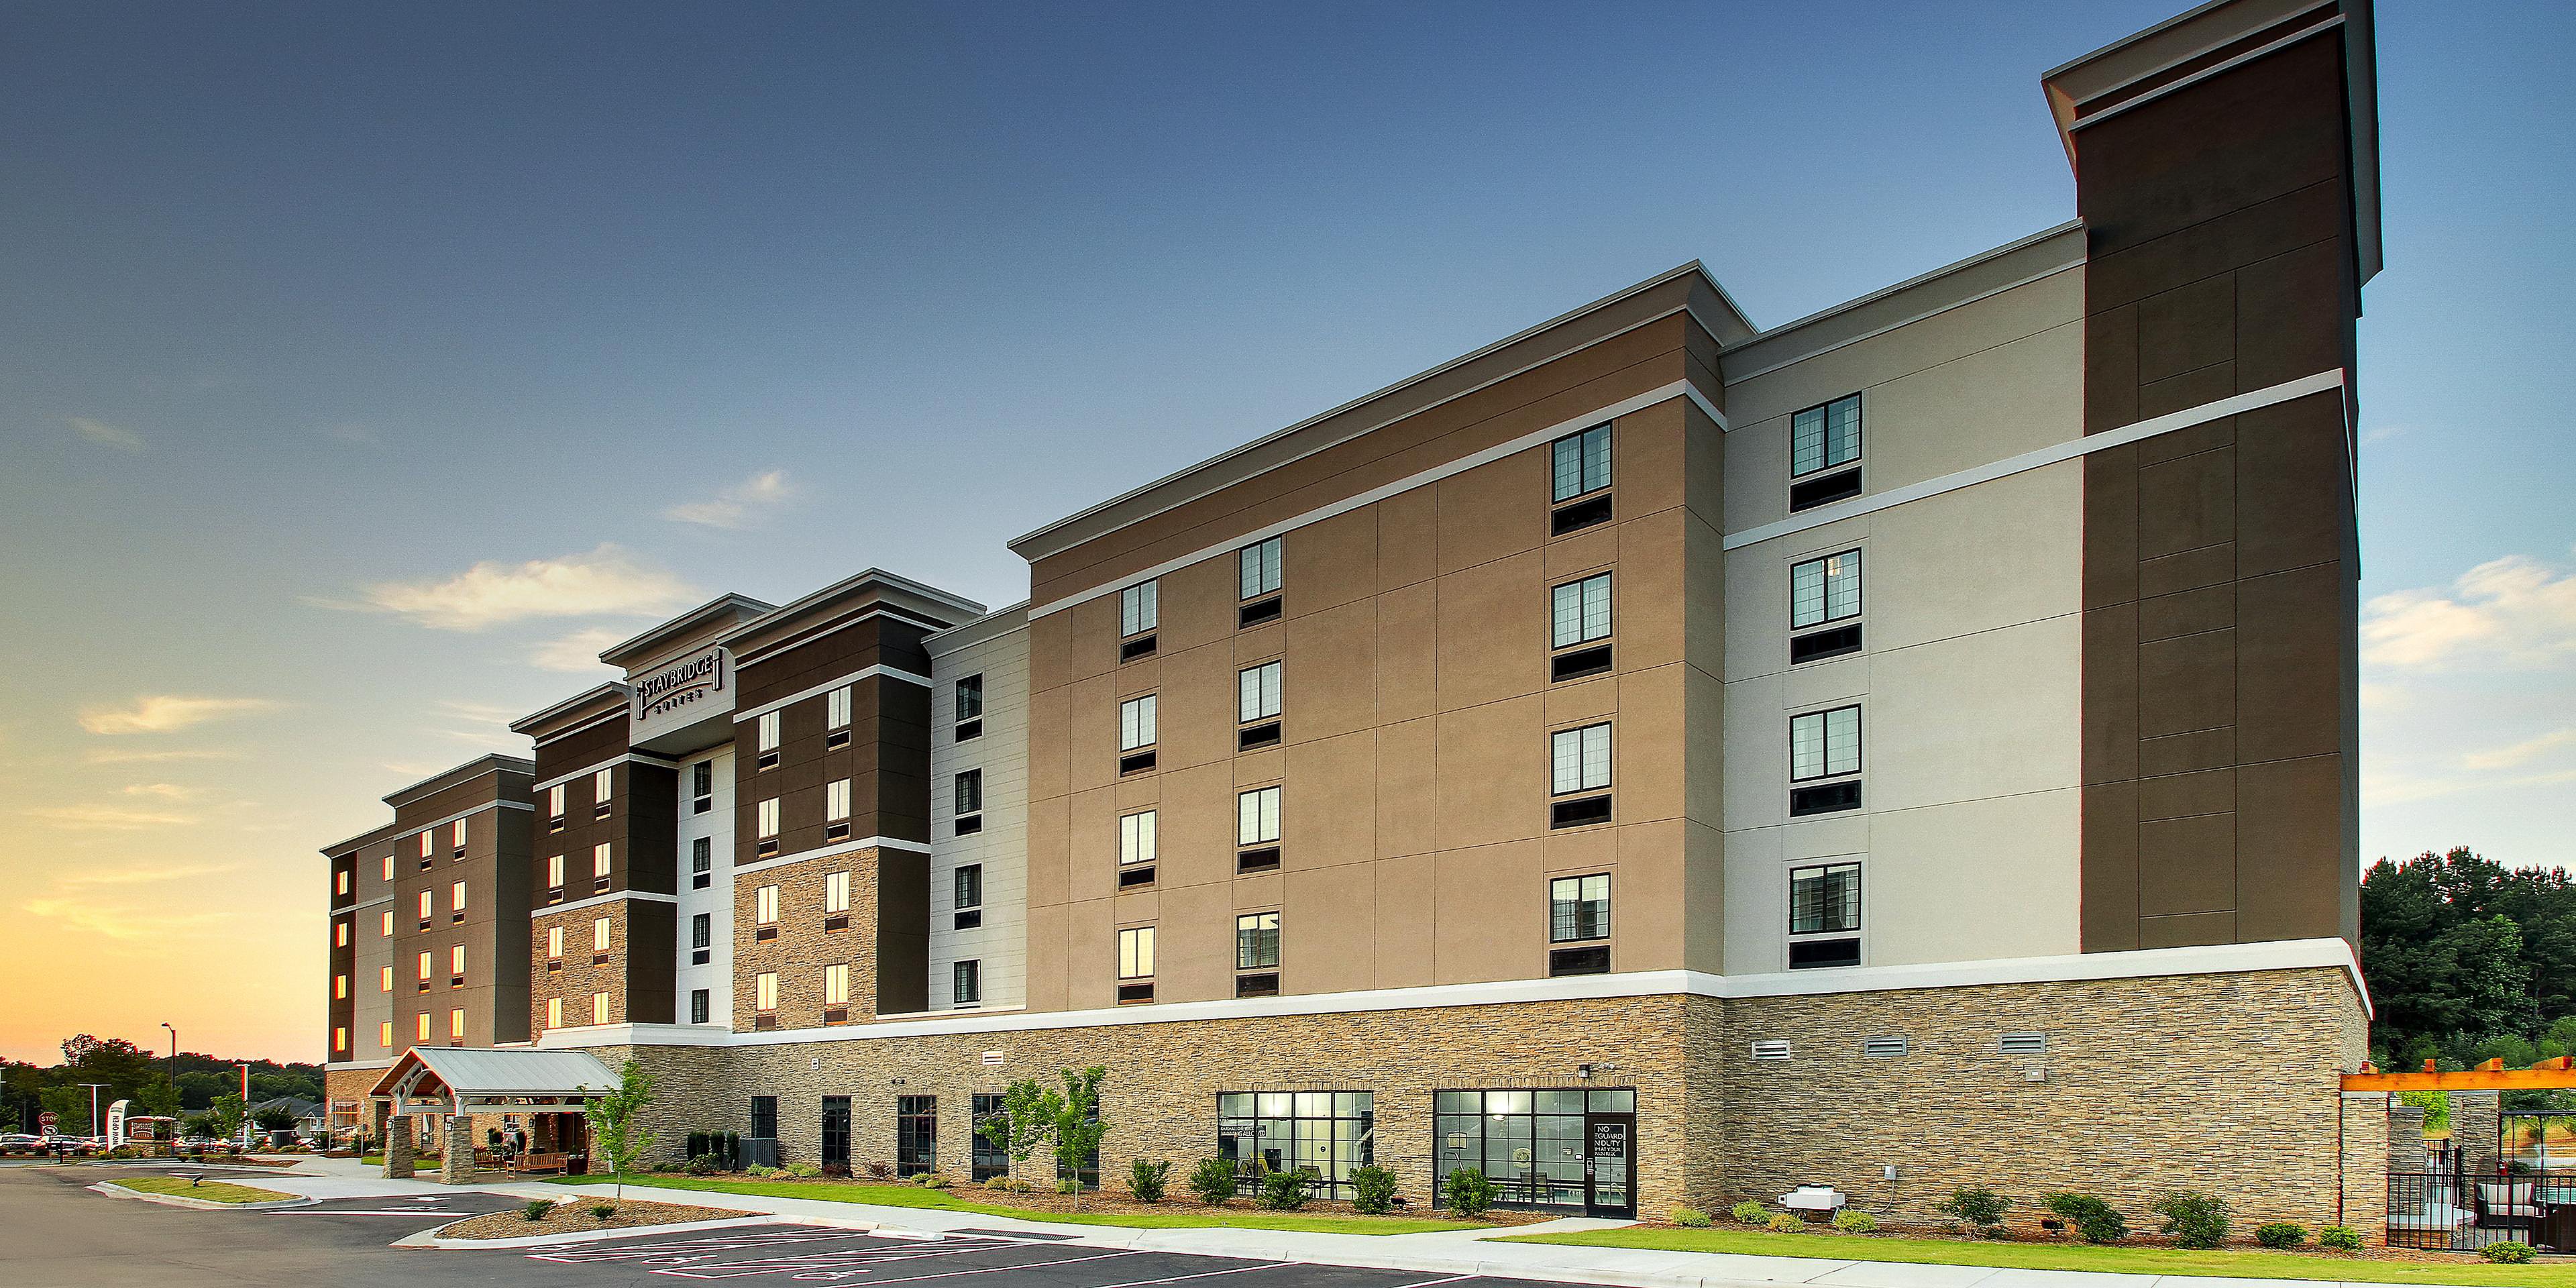 Extended Stay Hotels In Rock Hill Sc Staybridge Suites Rock Hill